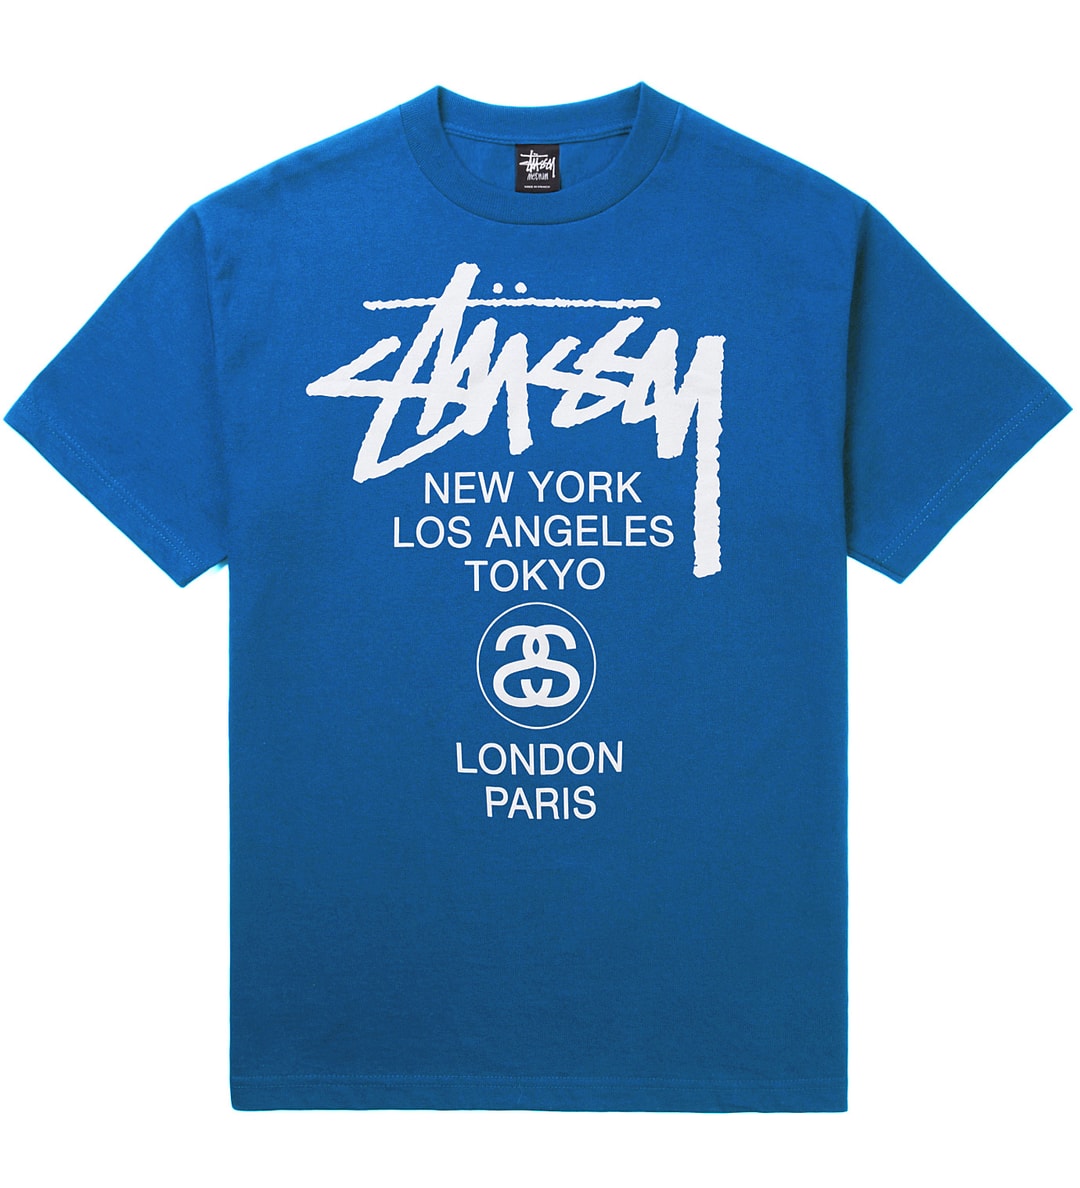 Stussy Rick Owens World Tour Collection White Tee Brand New Size Large